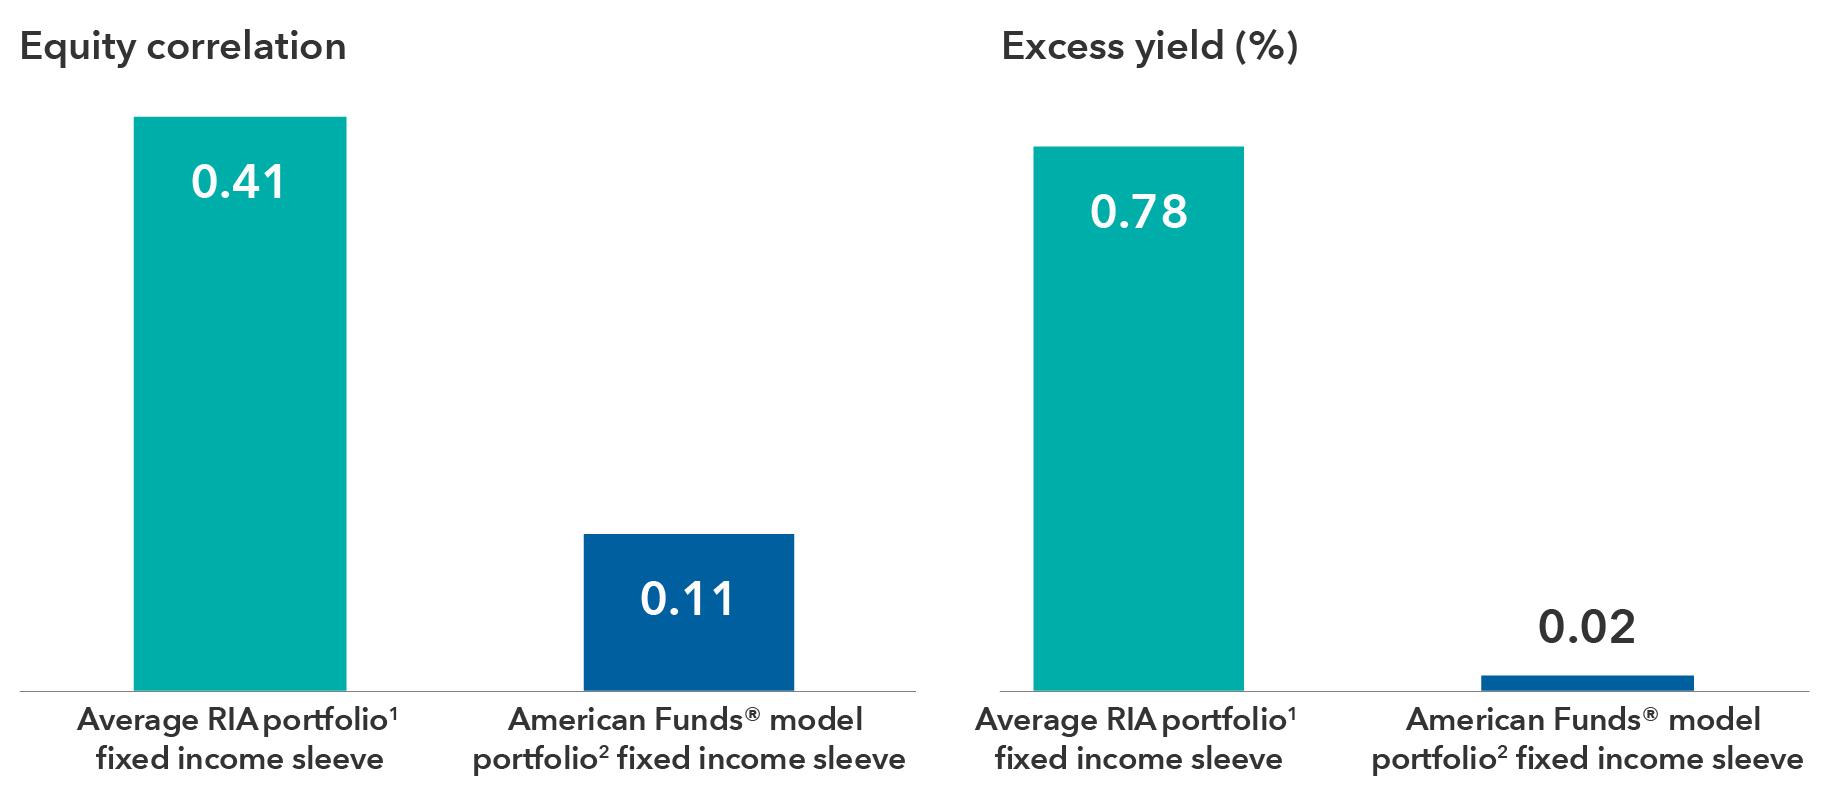 On the left, a bar chart showing the three-year correlation to the S&P 500 Index for the average RIA portfolio fixed income sleeve analyzed by Capital Group (three-year correlation to the S&P 500 Index of 0.41) and the American Funds model fixed income portfolio (three-year correlation to the S&P 500 Index of 0.11). On the right, a bar chart showing the 12-month yield of the fixed income sleeve minus the 12-month yield of an ETF vehicle that tracks the Bloomberg Aggregate Index and is net of fees for the average RIA portfolio fixed income sleeve analyzed by Capital Group (excess yield of 0.78%) and the American Funds model fixed income portfolio (excess yield of 0.02%).